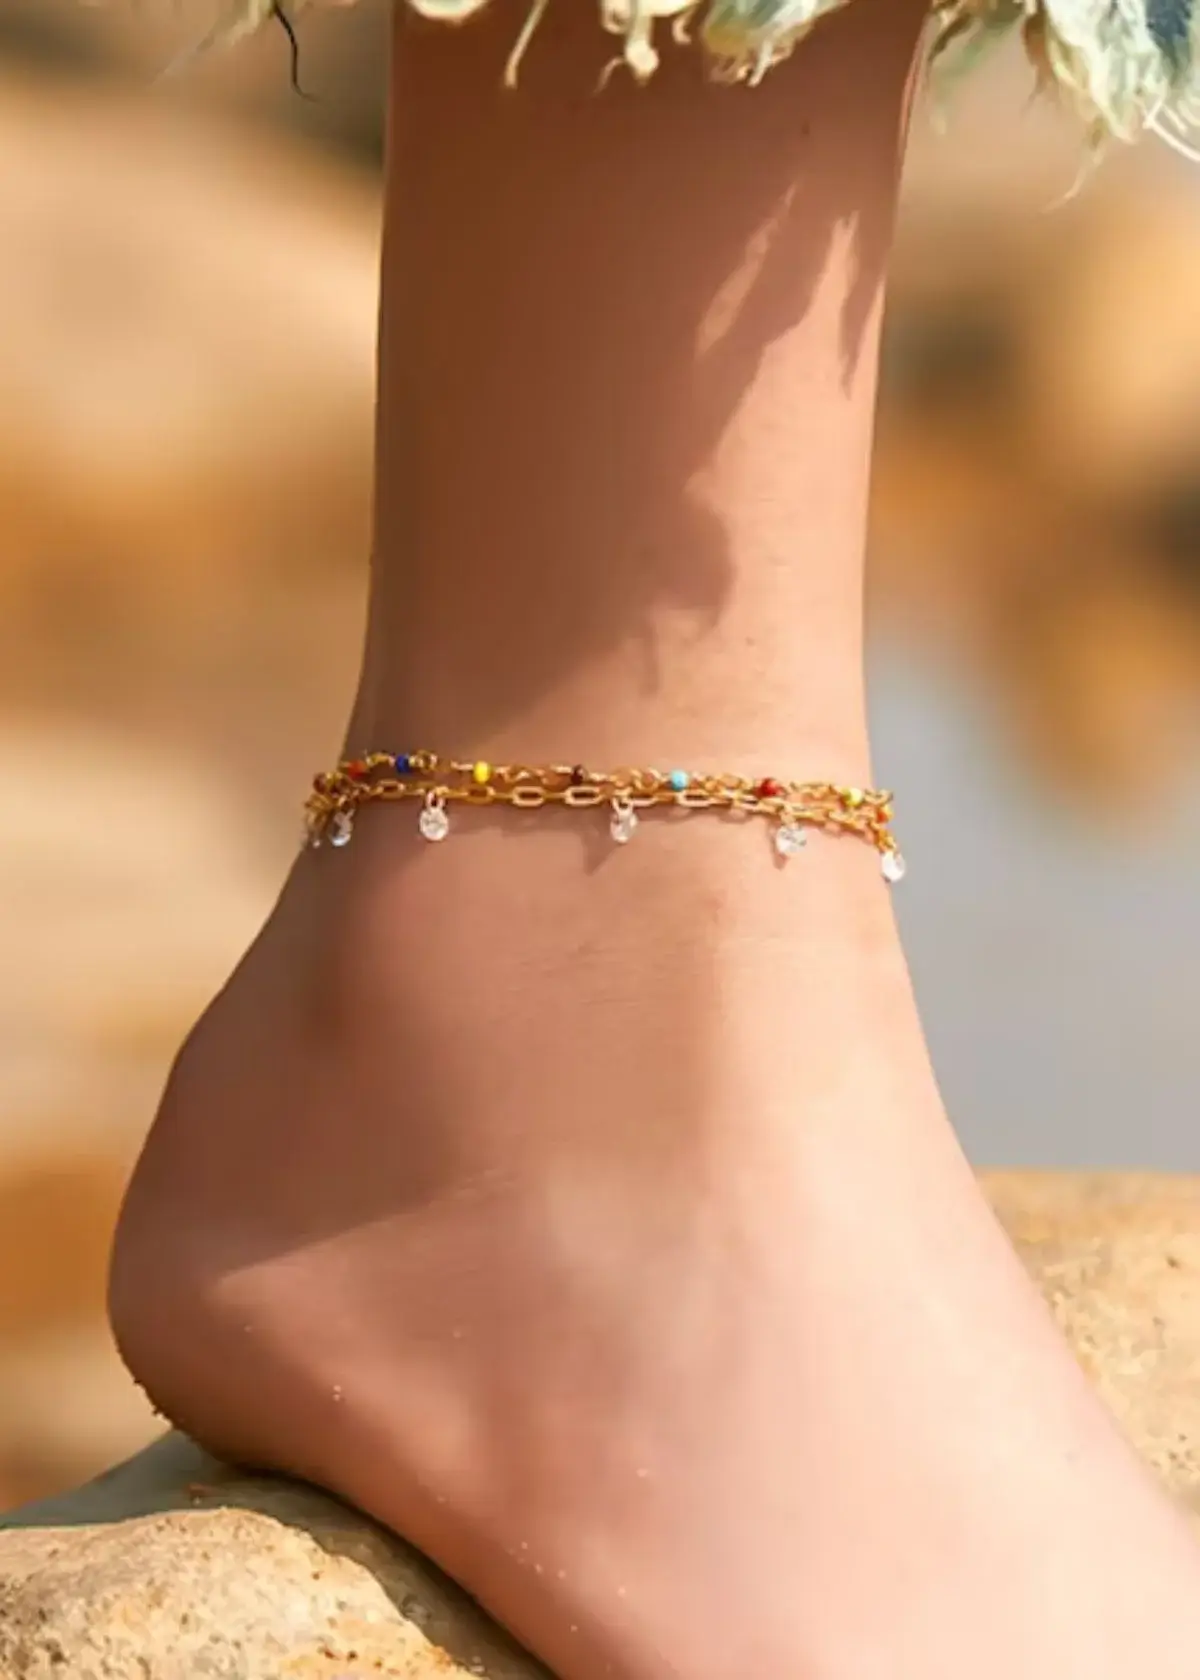 How can I tell if a gold ankle bracelet is genuine?